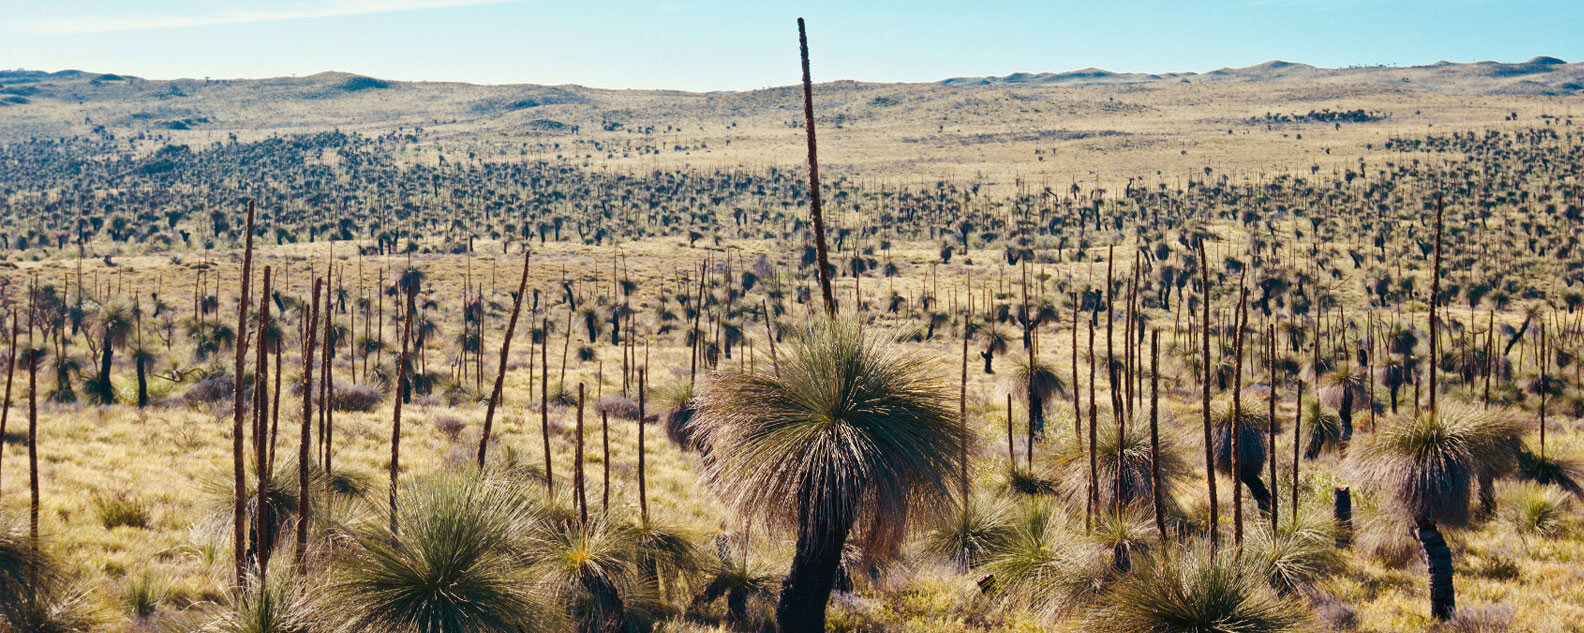 Grass Trees in the outback